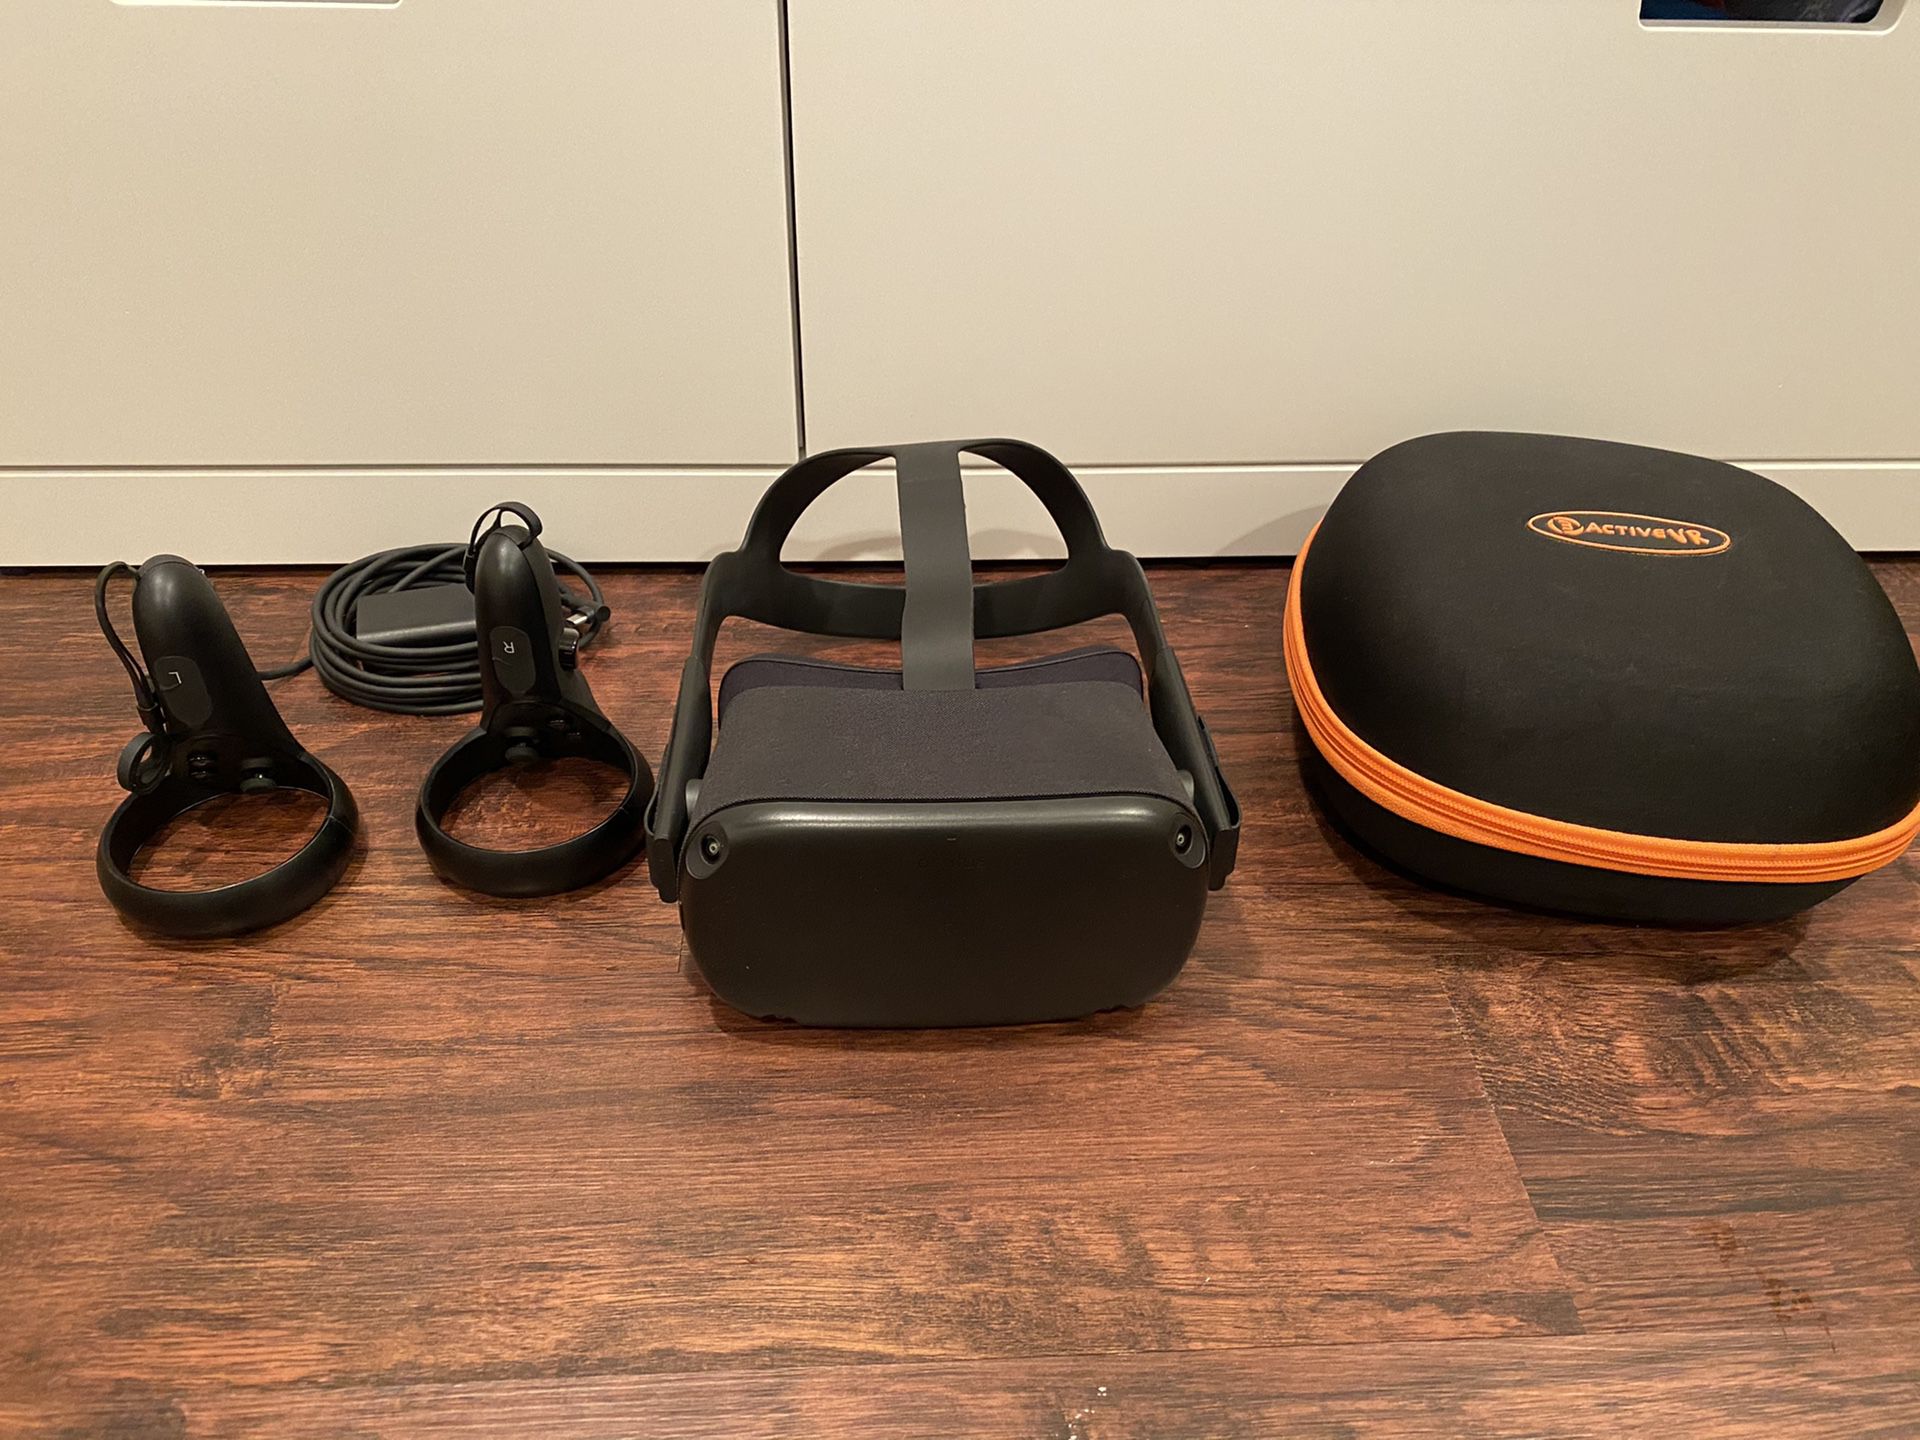 Oculus quest virtual reality all in one 128gb 128 gigabyte storage VR gaming game head set and touch controllers 5 video games